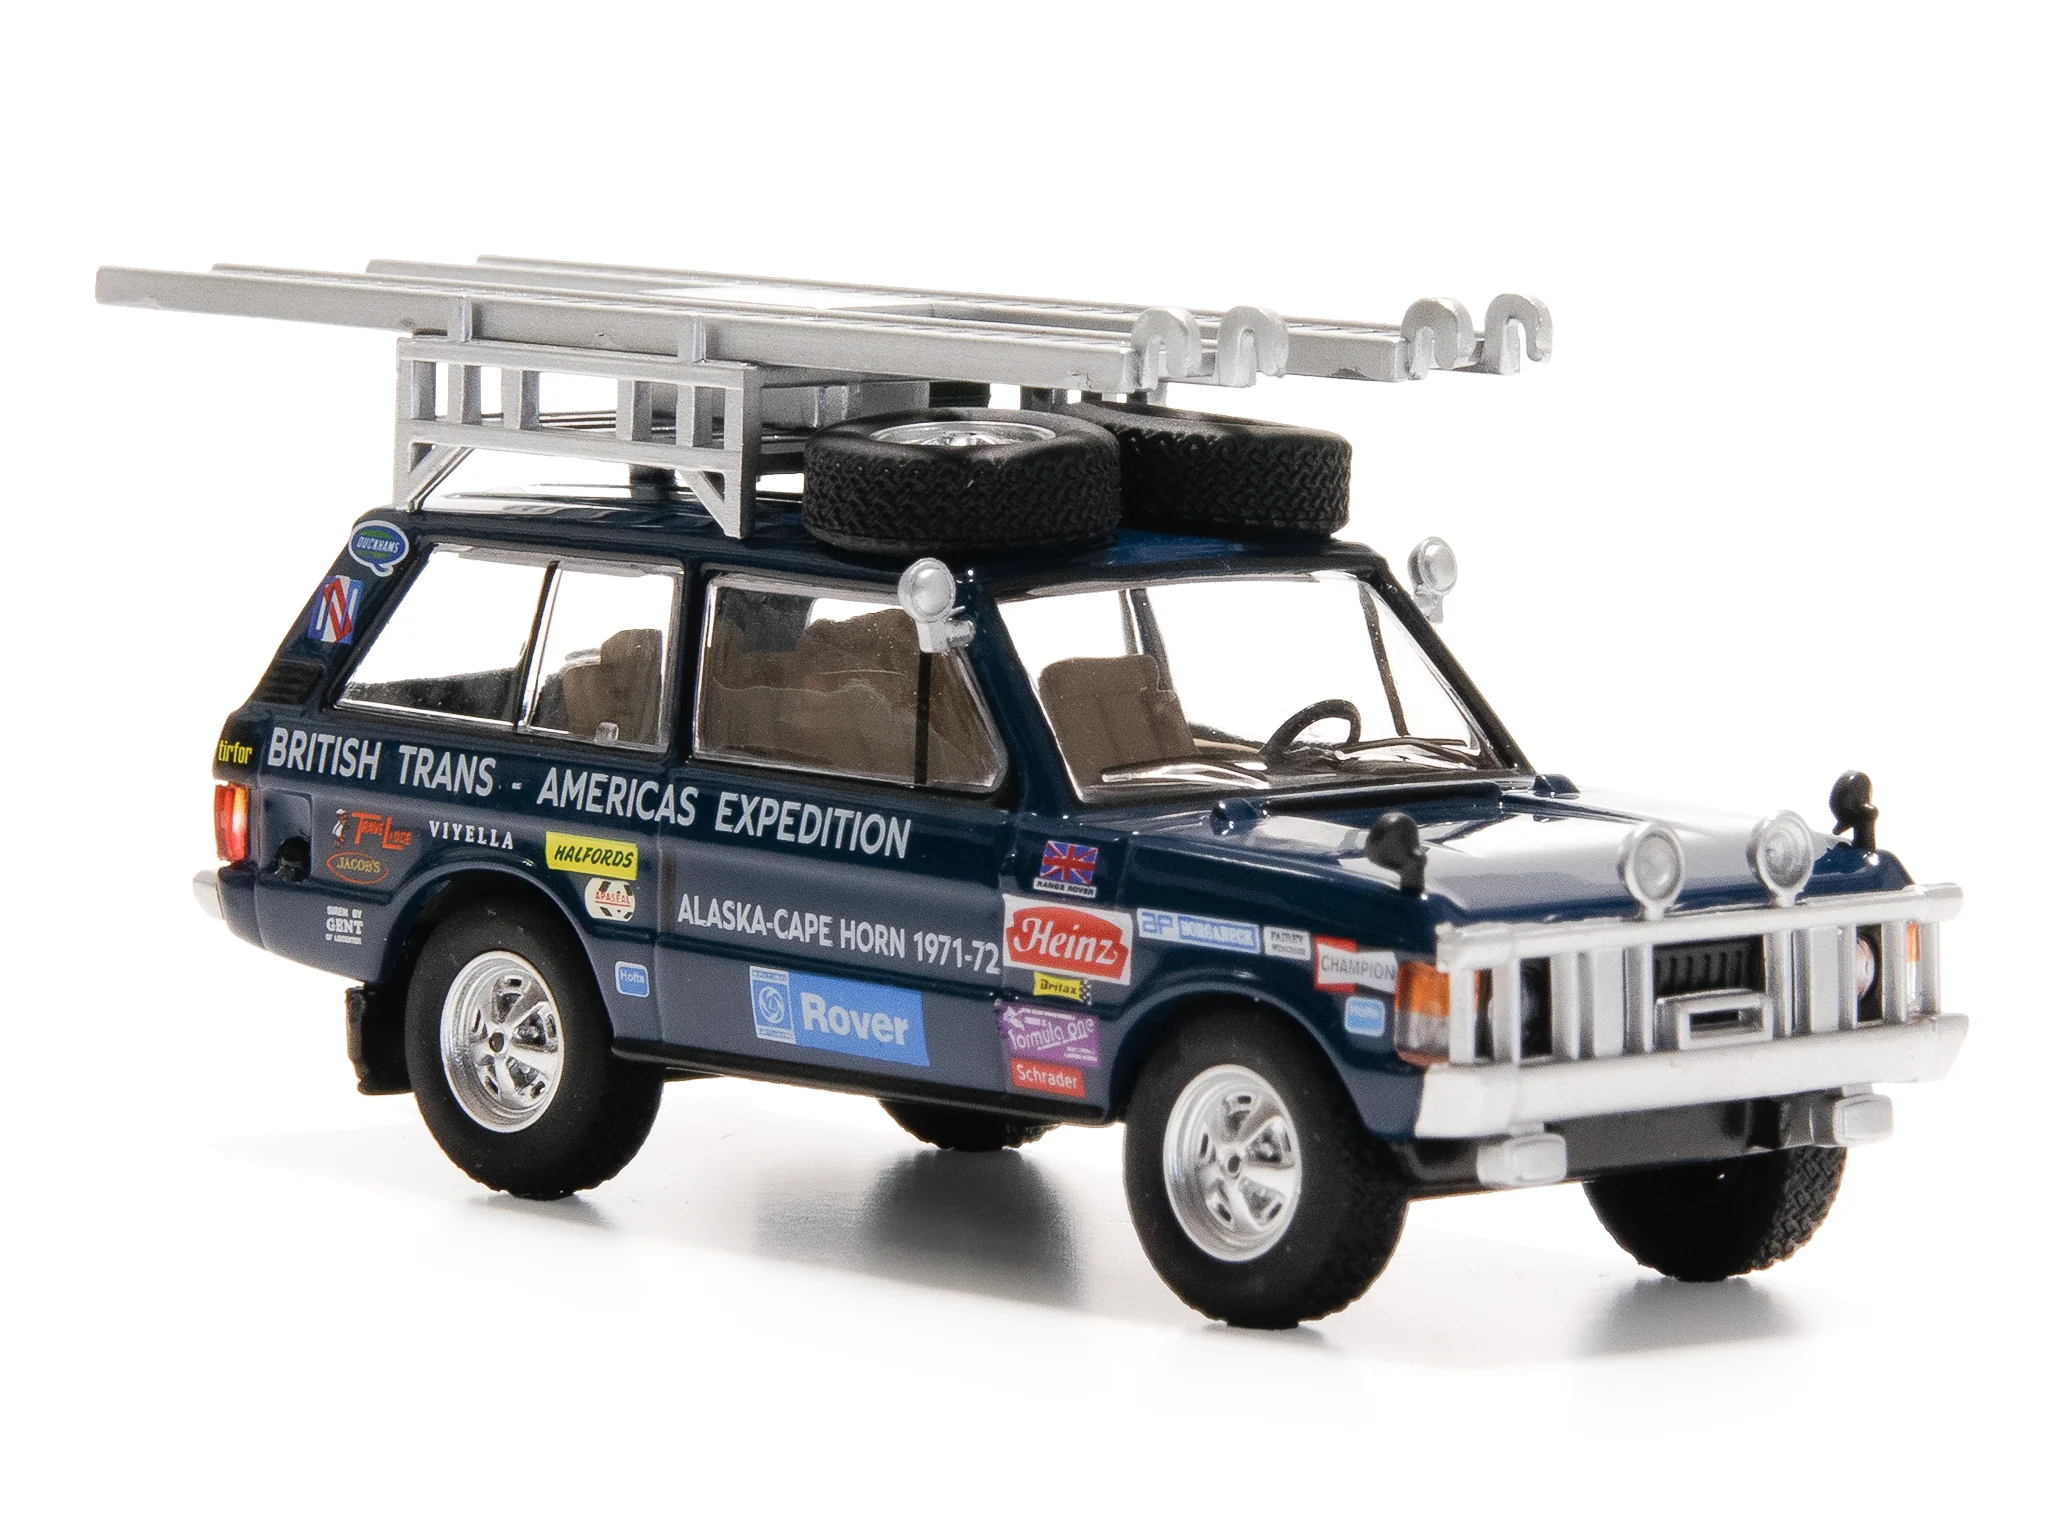 Mini GT Range Rover 1971 Expedition 1:64 Die Cast